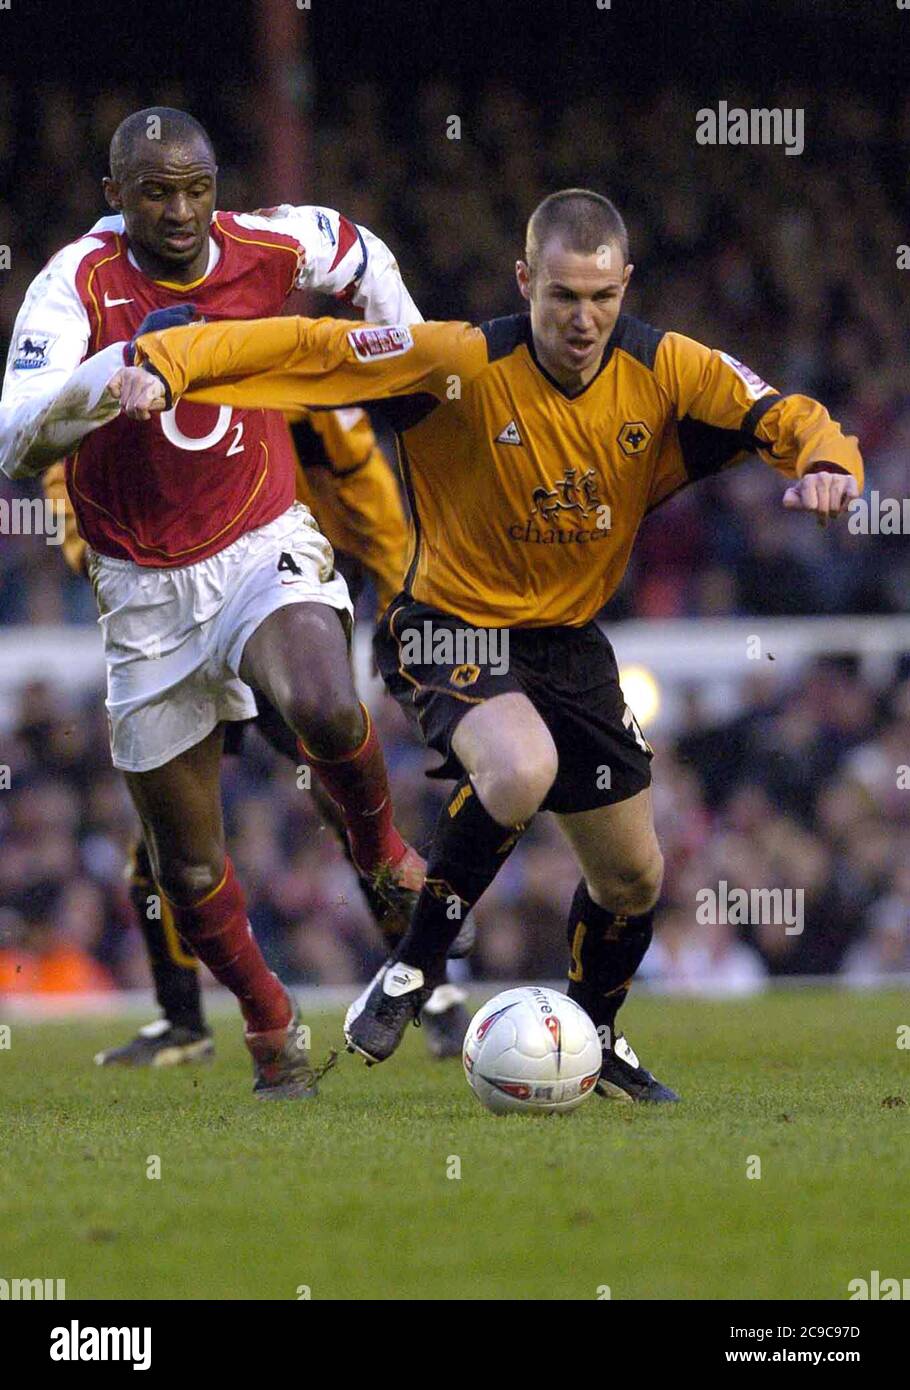 Arsenal v Wolverhampton Wanderers, 29 January 2005 at Highbury. FA Cup 4th round. Kenny Miller and Patrick Vieira Stock Photo